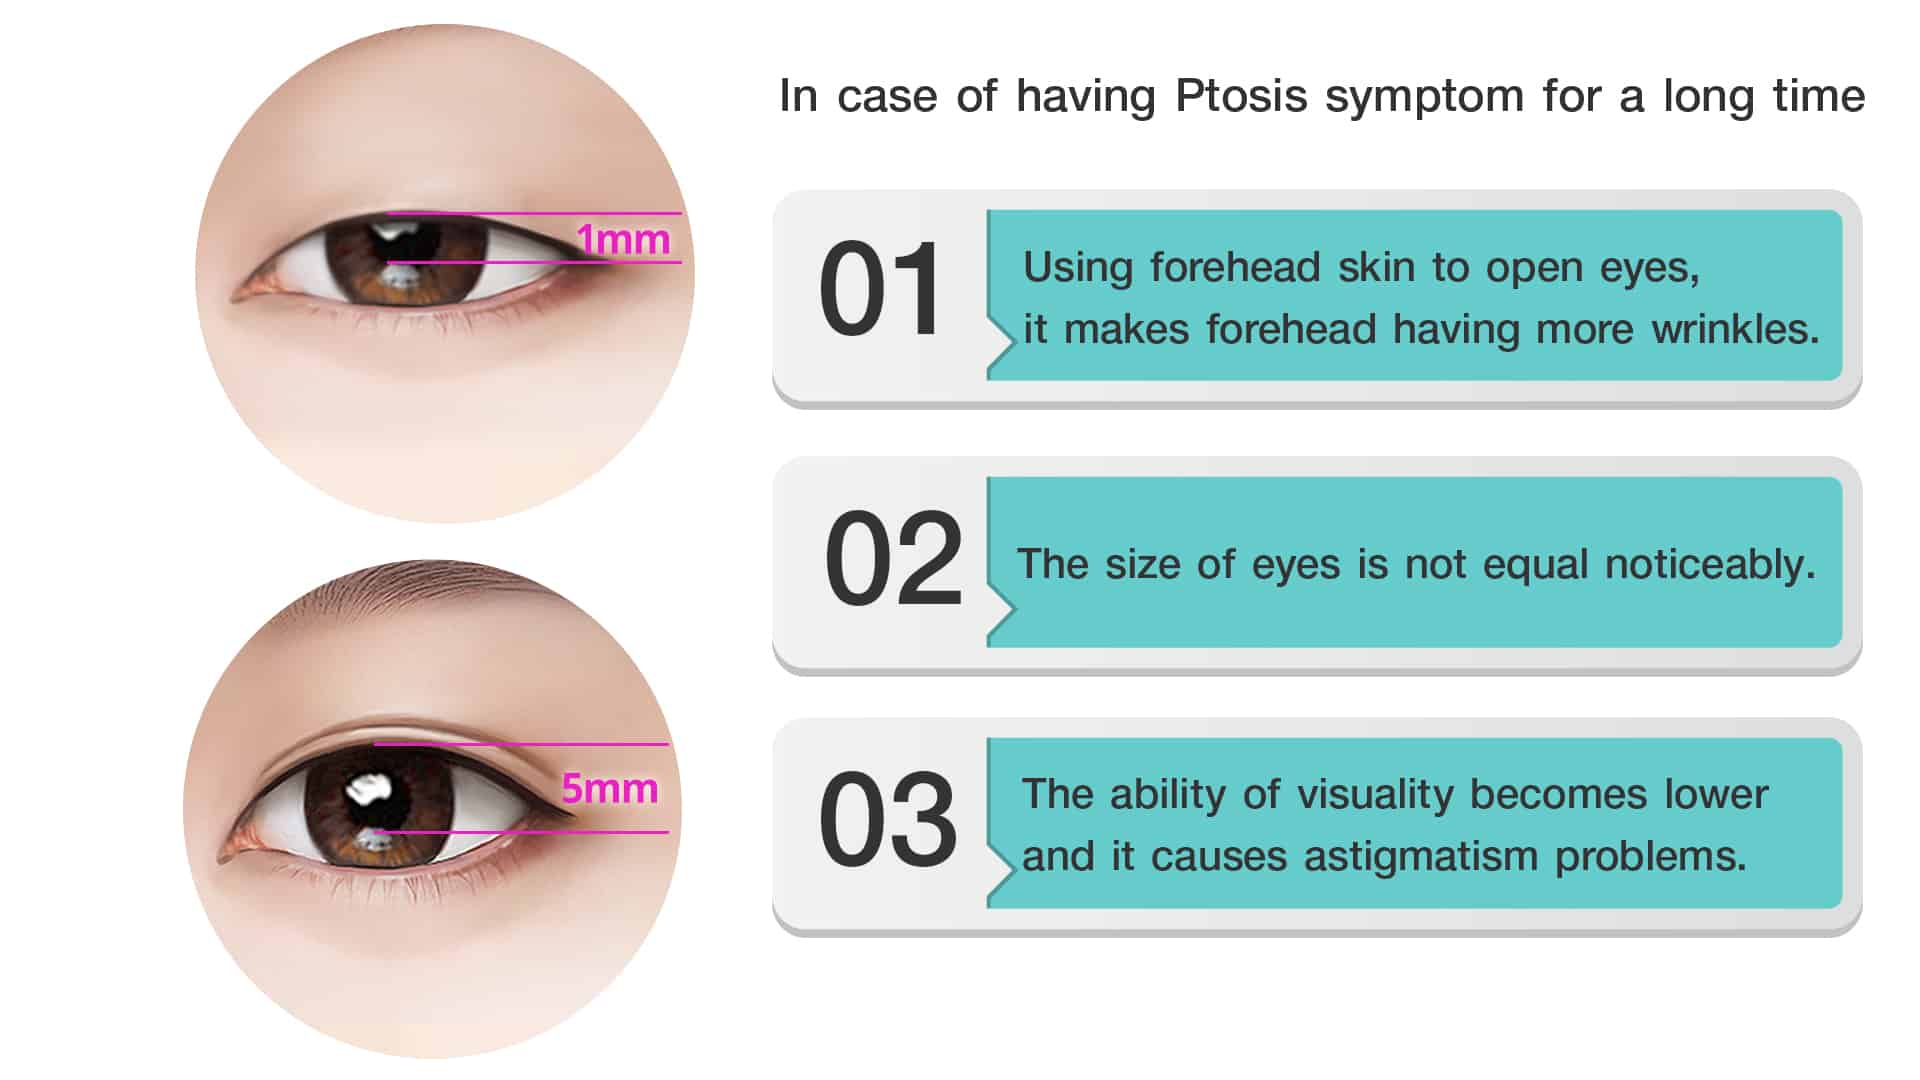 In case of having Ptosis symptom for a long time